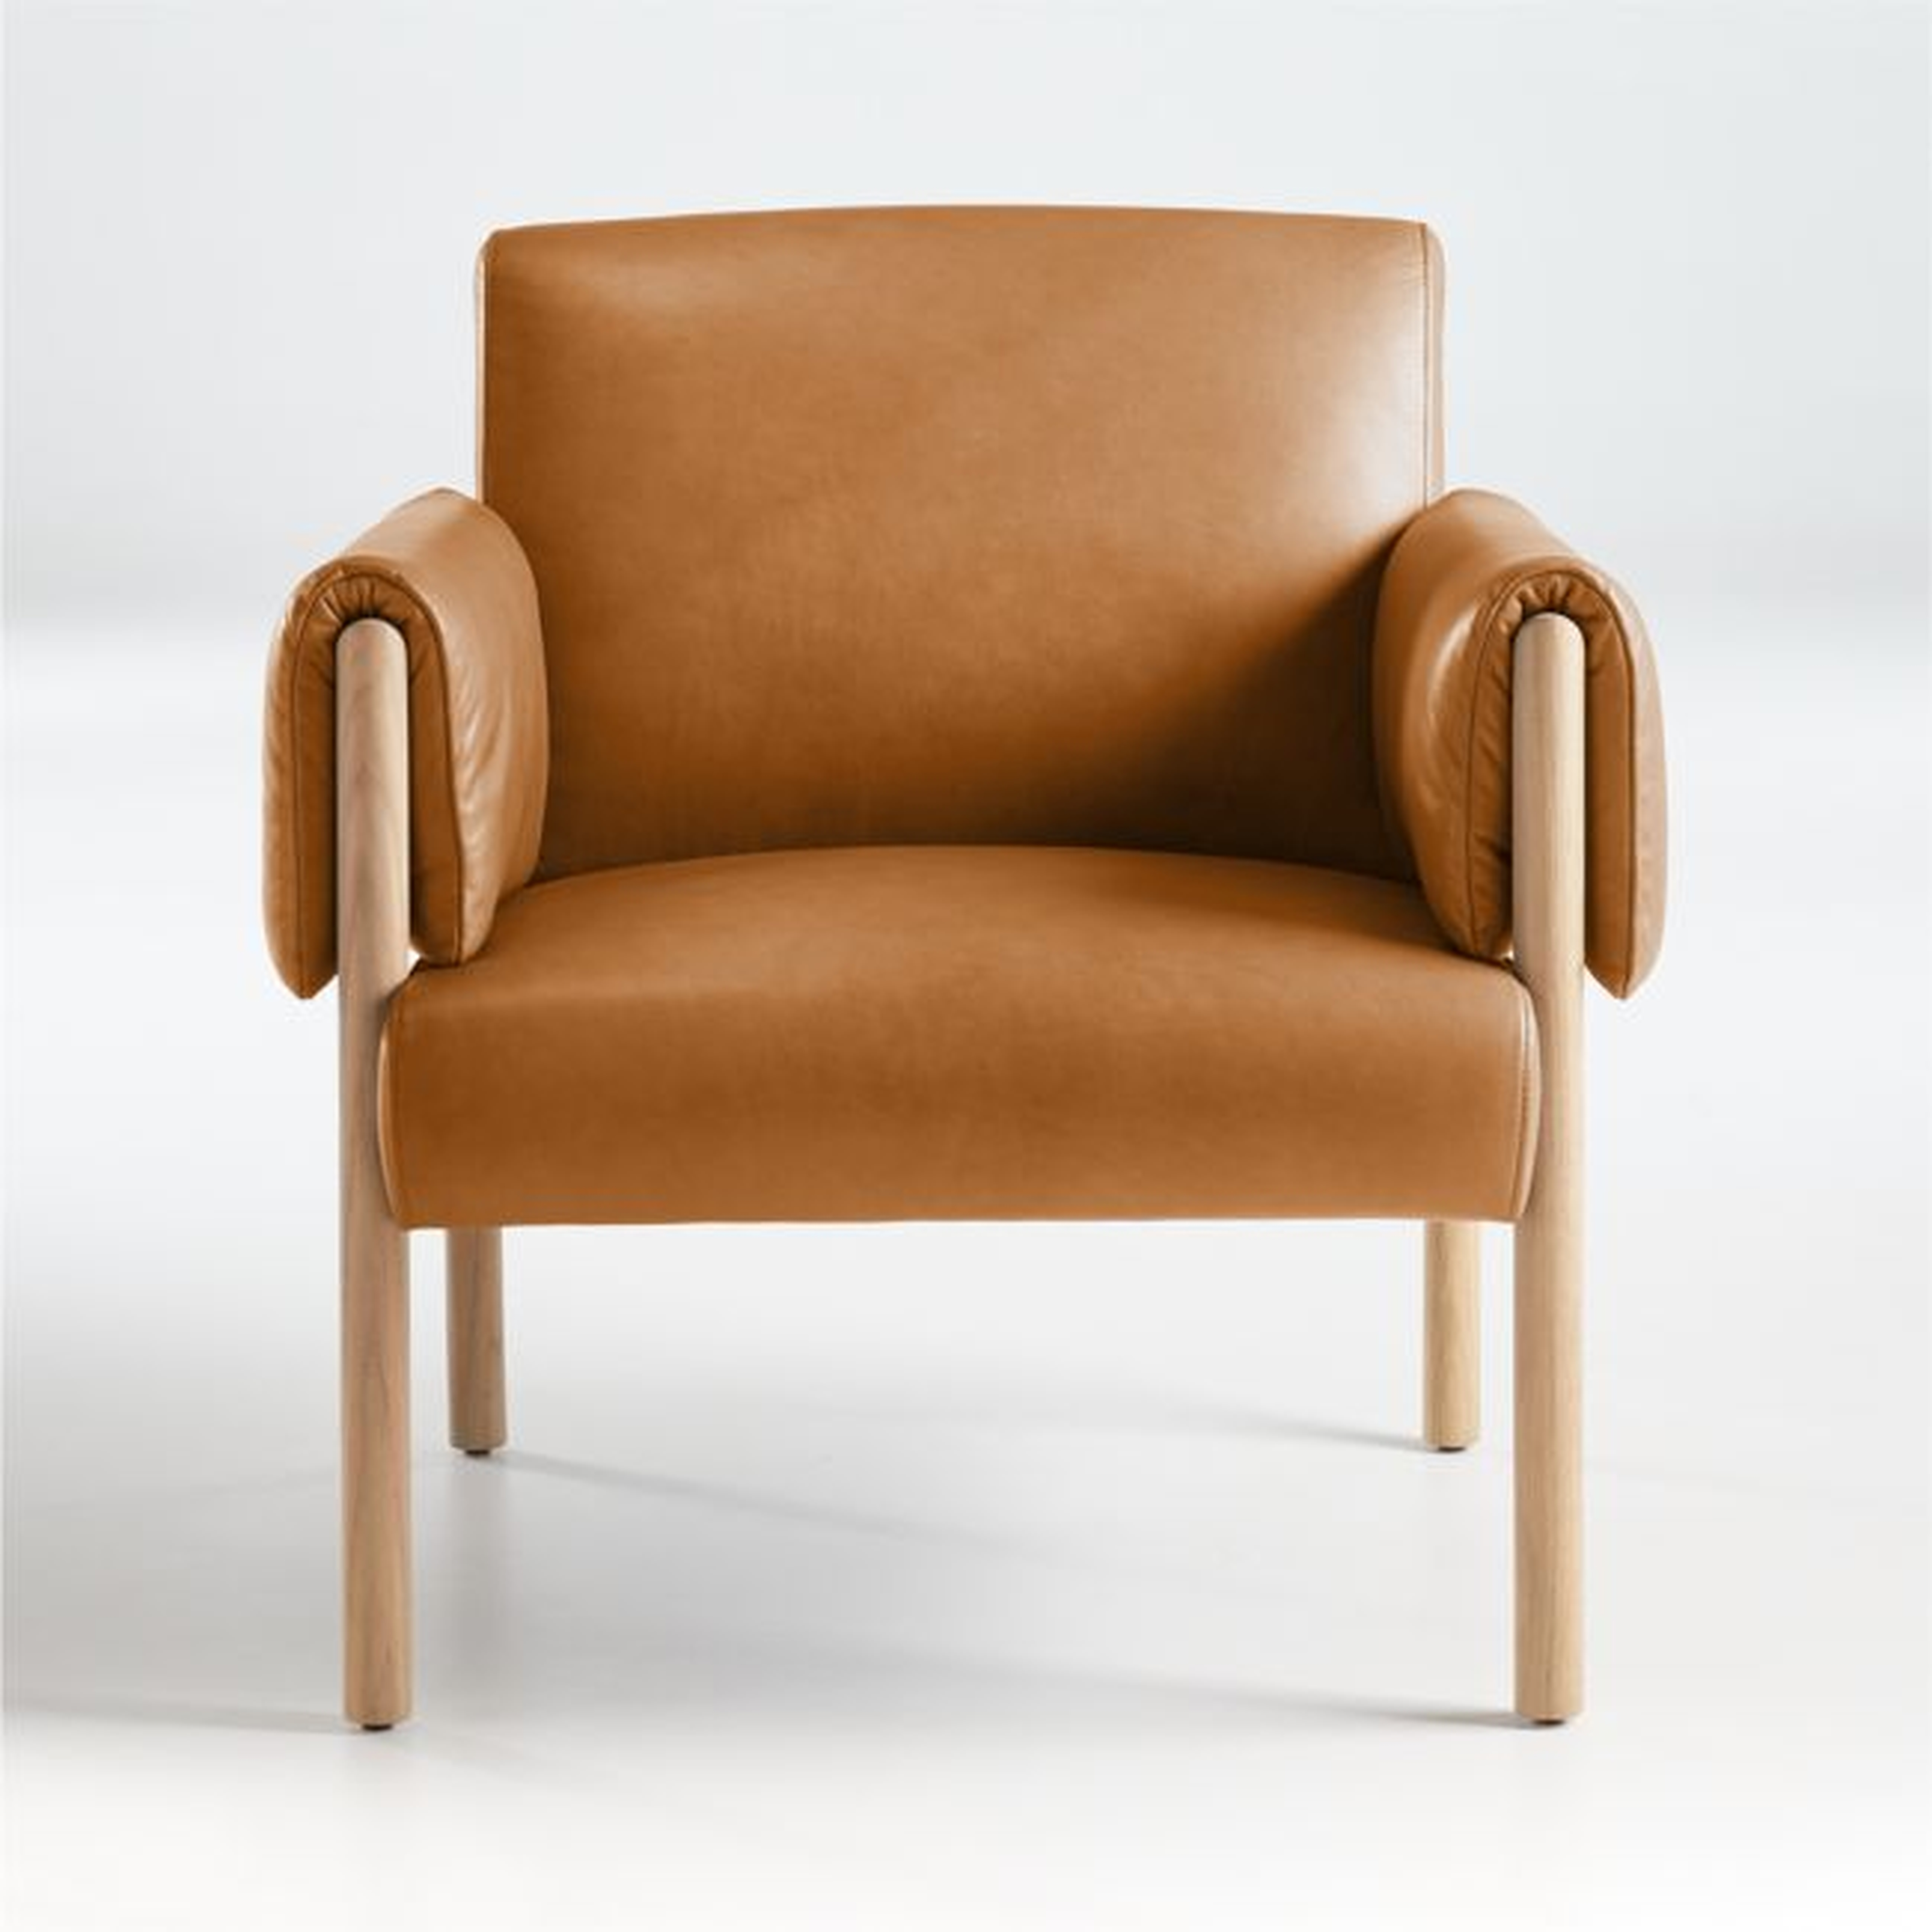 Diderot Wood & Leather Chair - Crate and Barrel